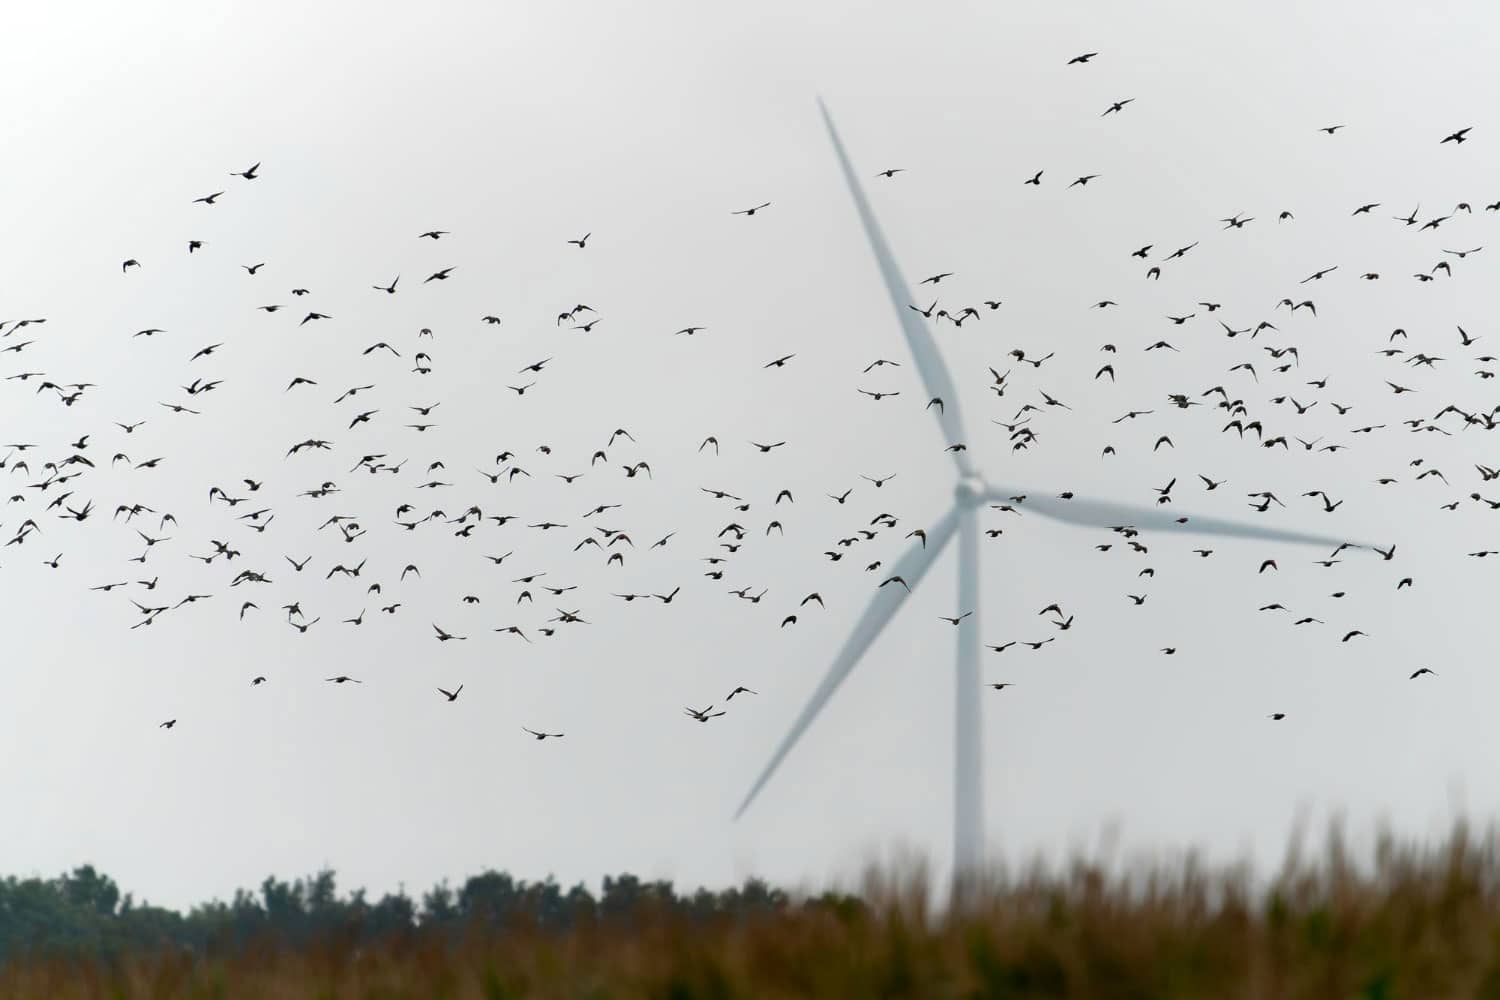 Active control of wind turbine speed can help reduce bird mortality.